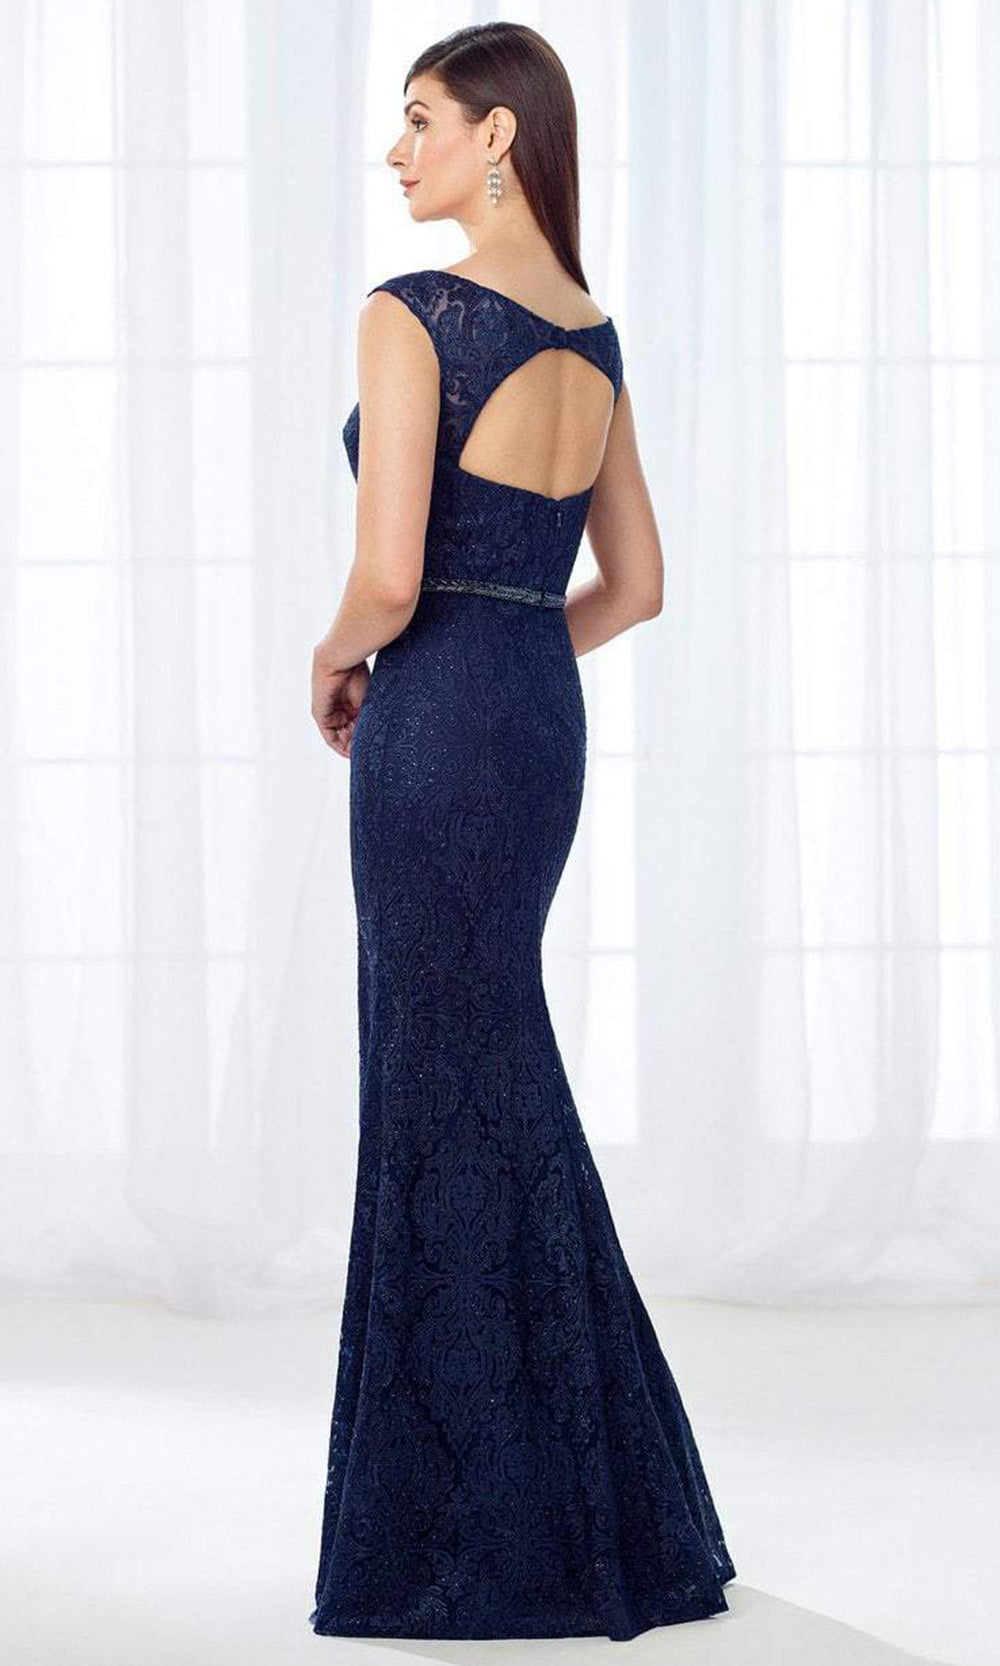 Cameron Blake - Bateau Neck Lace Fitted Gown 118687 - 1 pc Navy In Size 16 Available CCSALE 16 / Navy